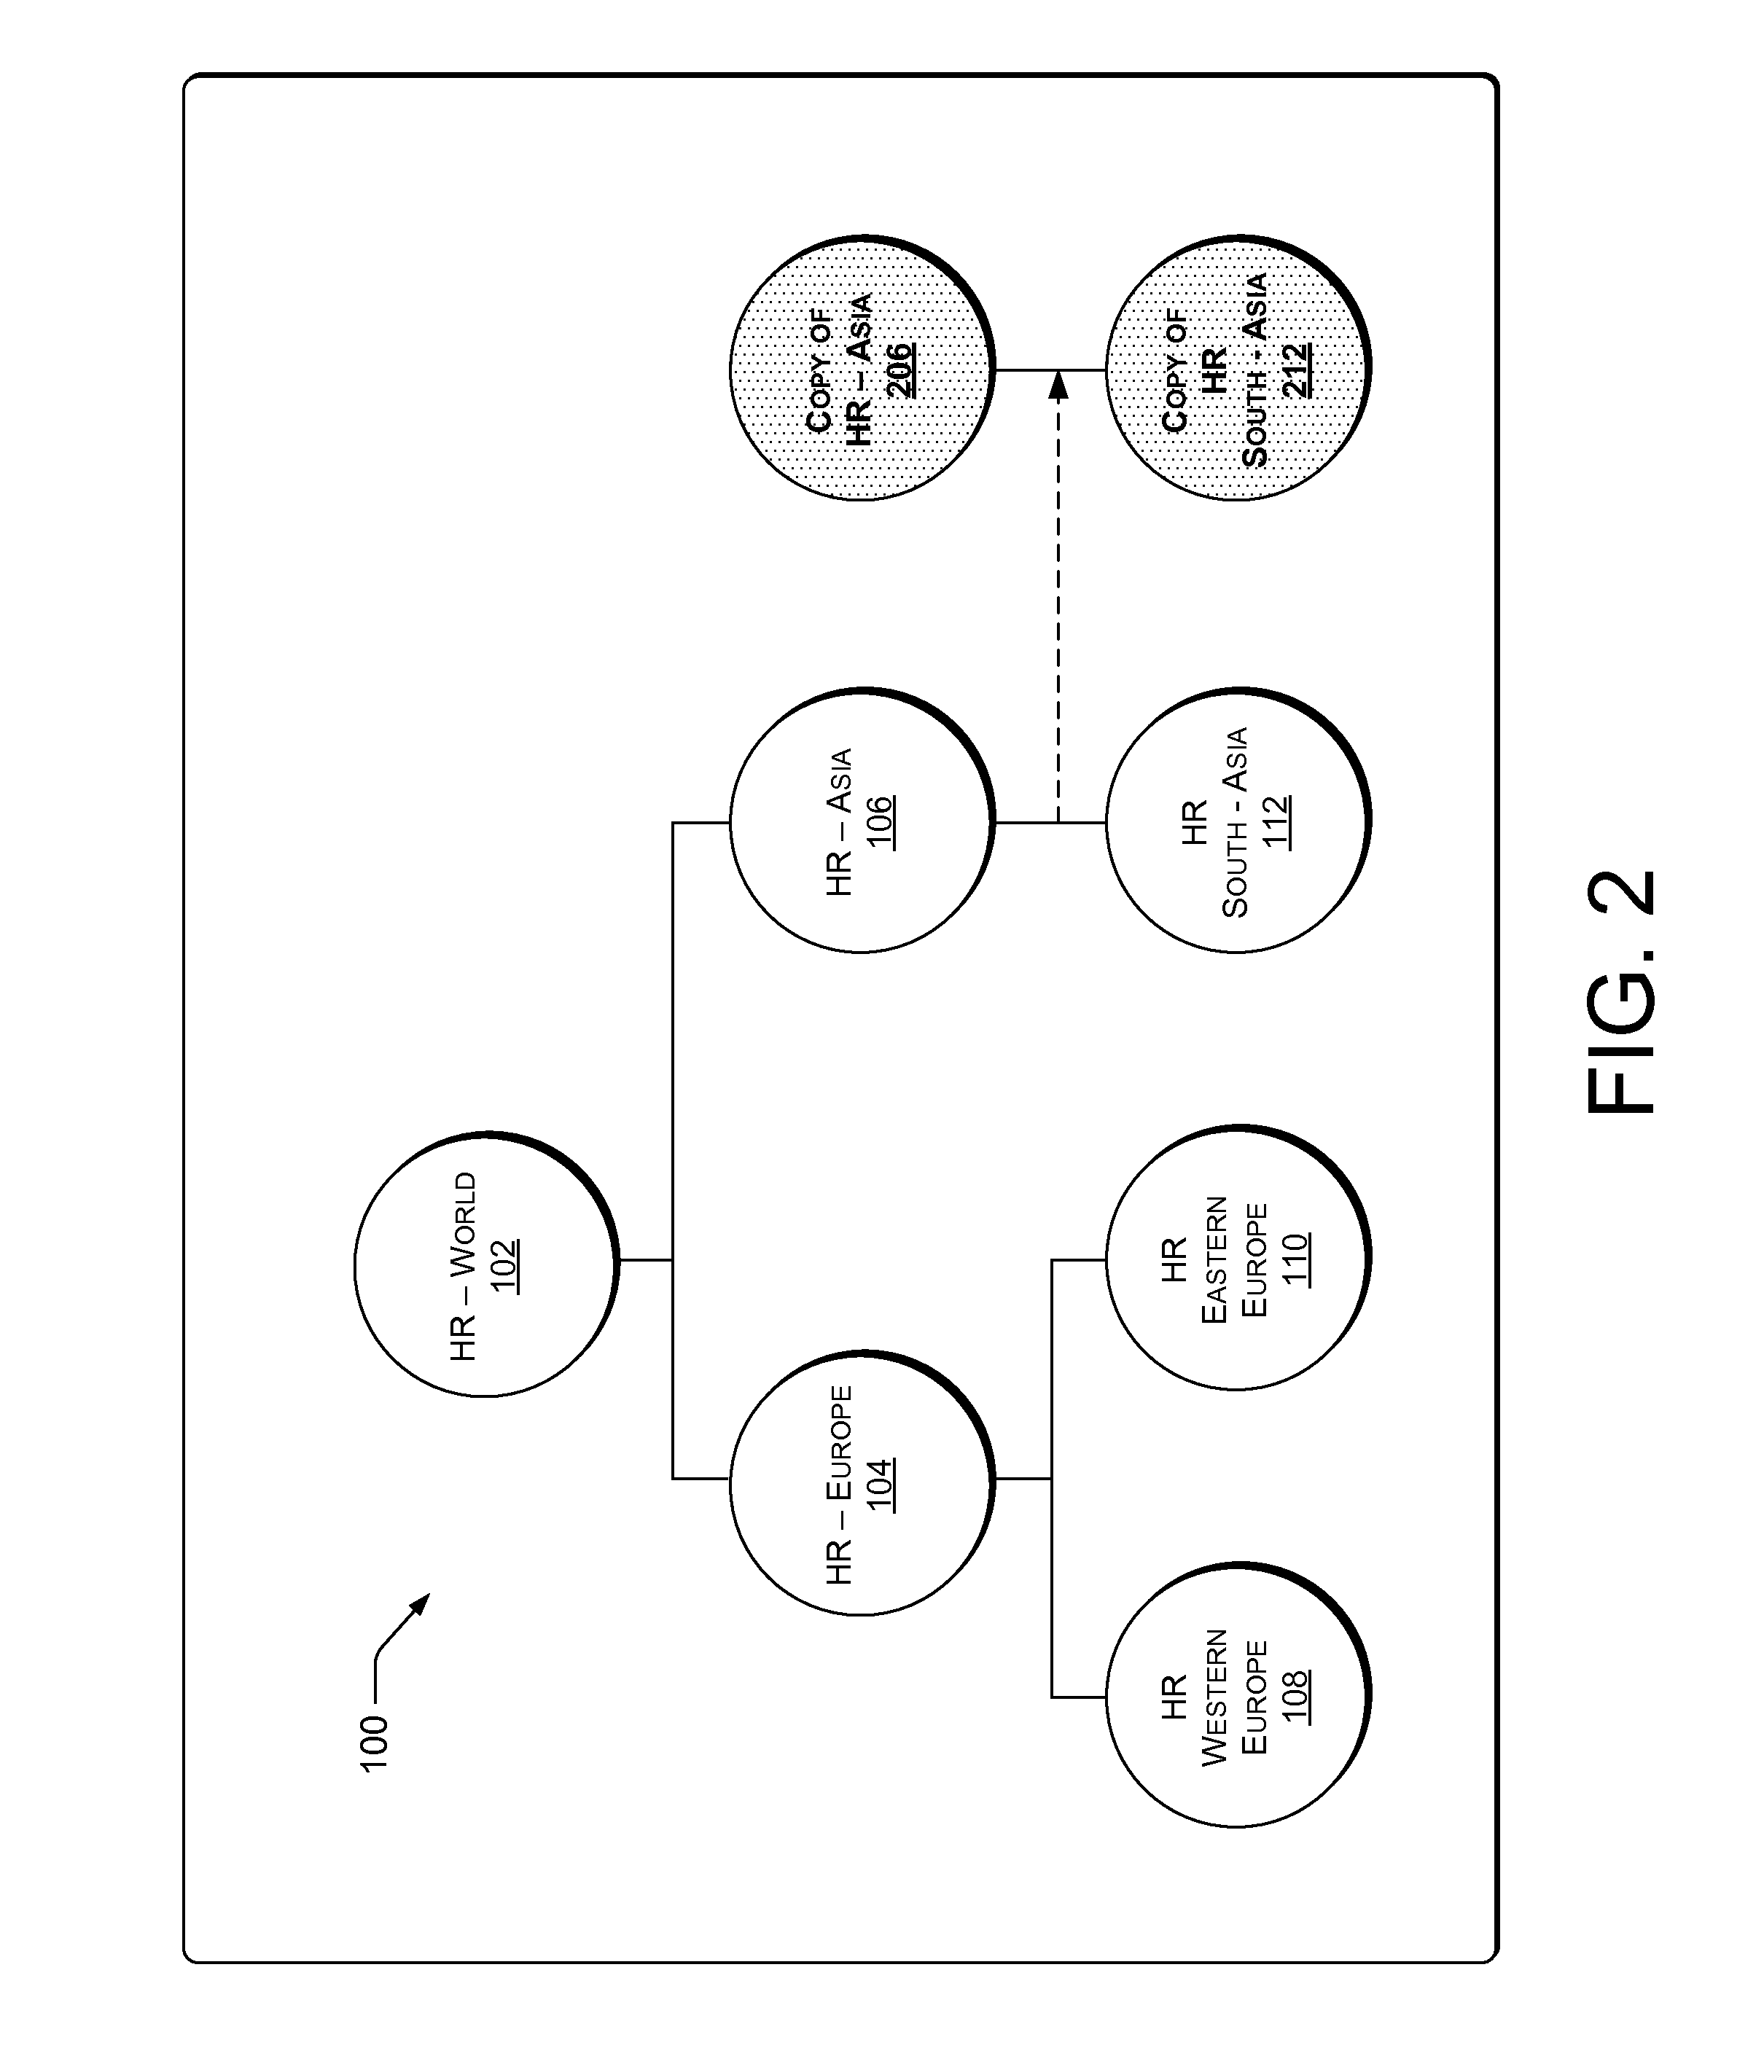 Method and system for managing and securing subsets of data in a large distributed data store